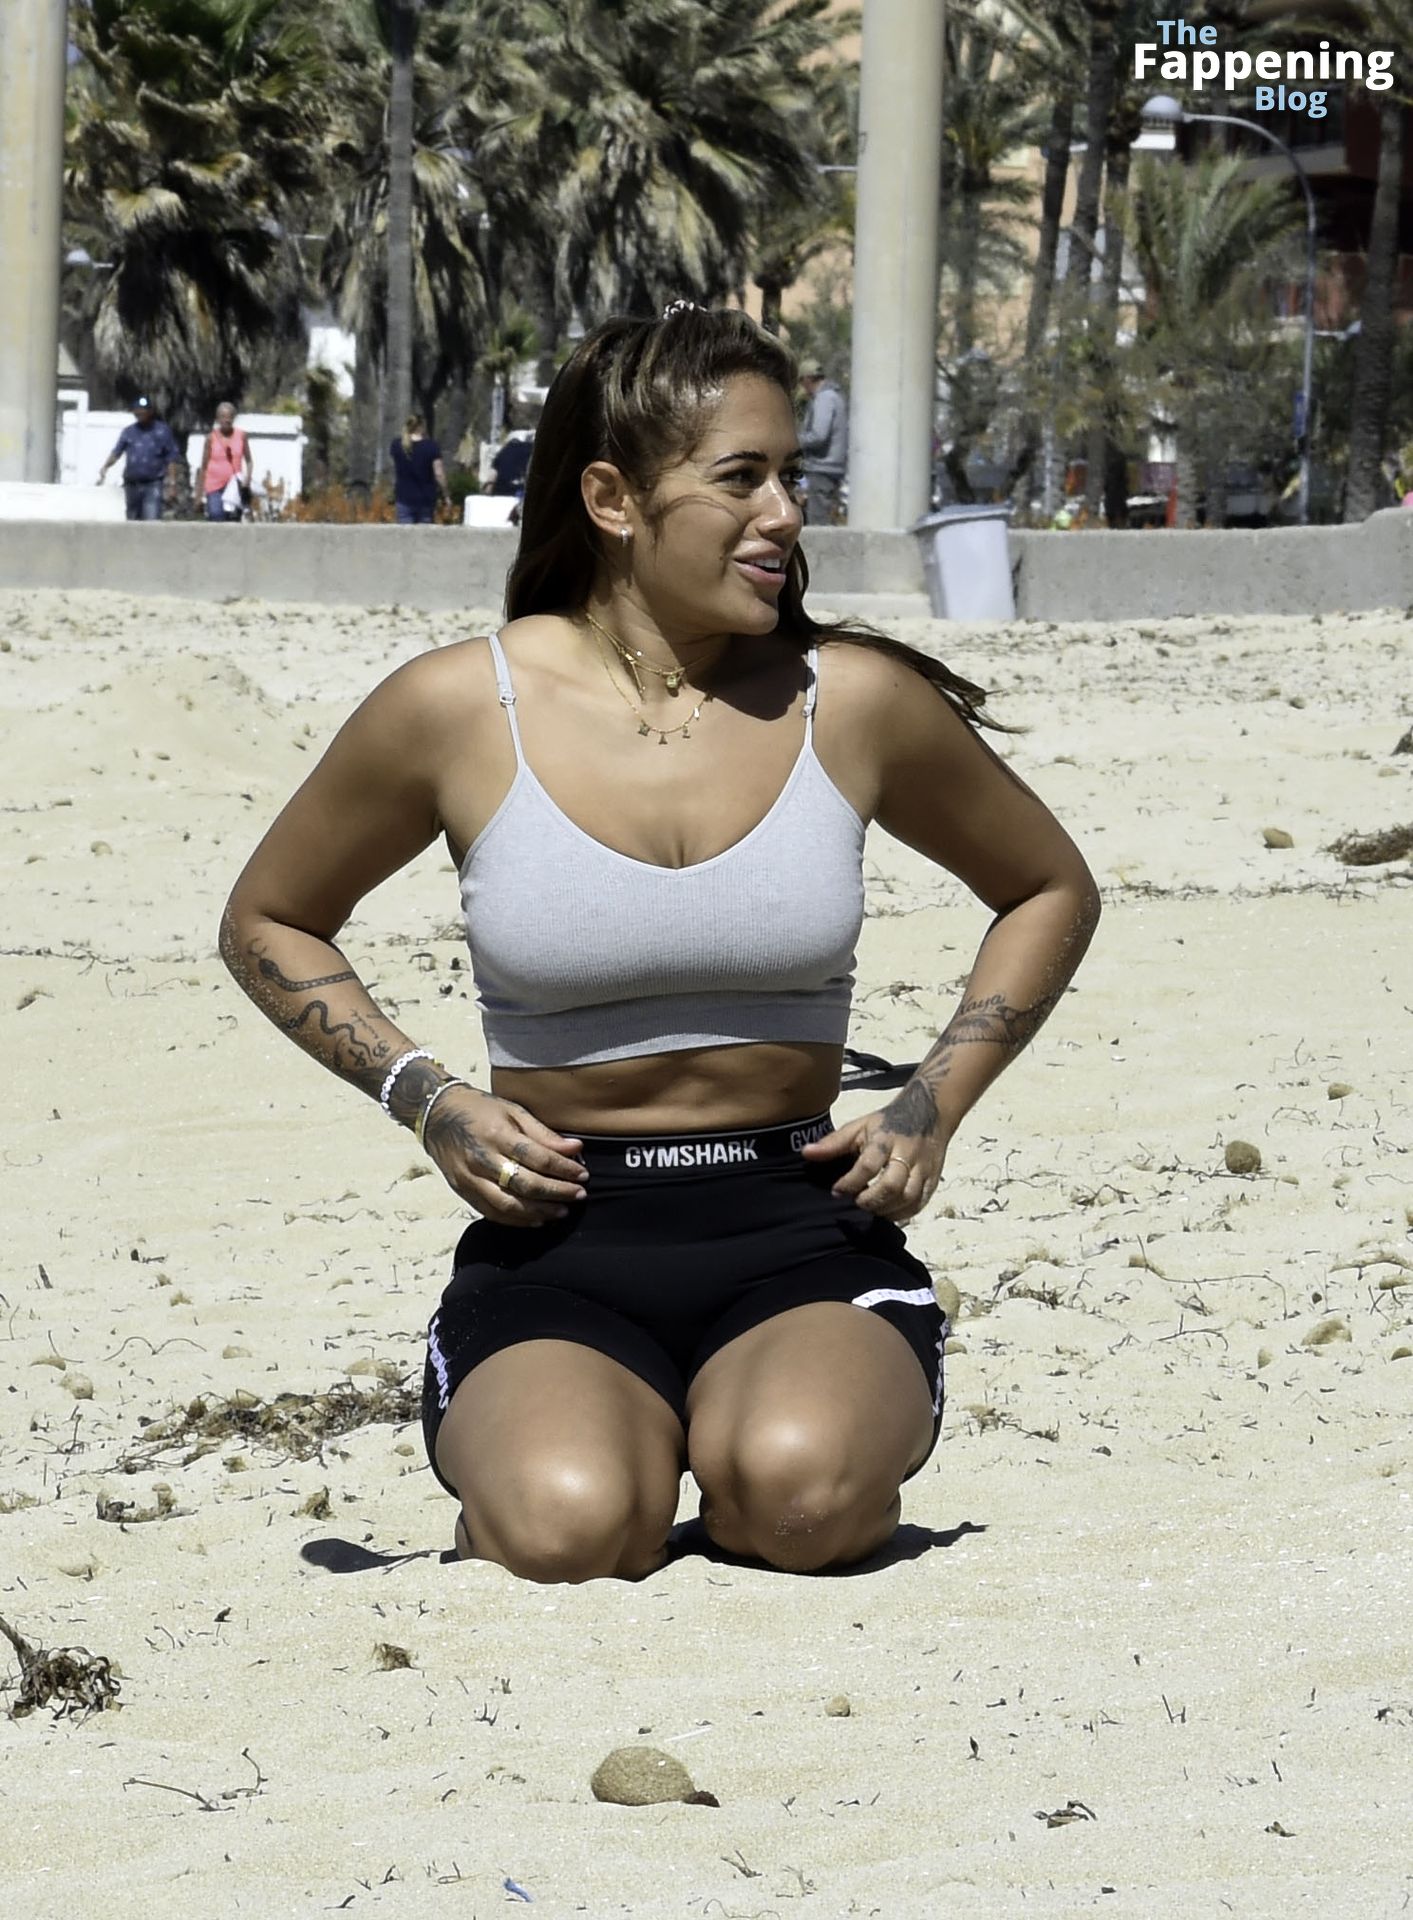 Malin Andersson Shows Off Weight Loss As She Exercises on the Beach with Her PT (28 Photos)